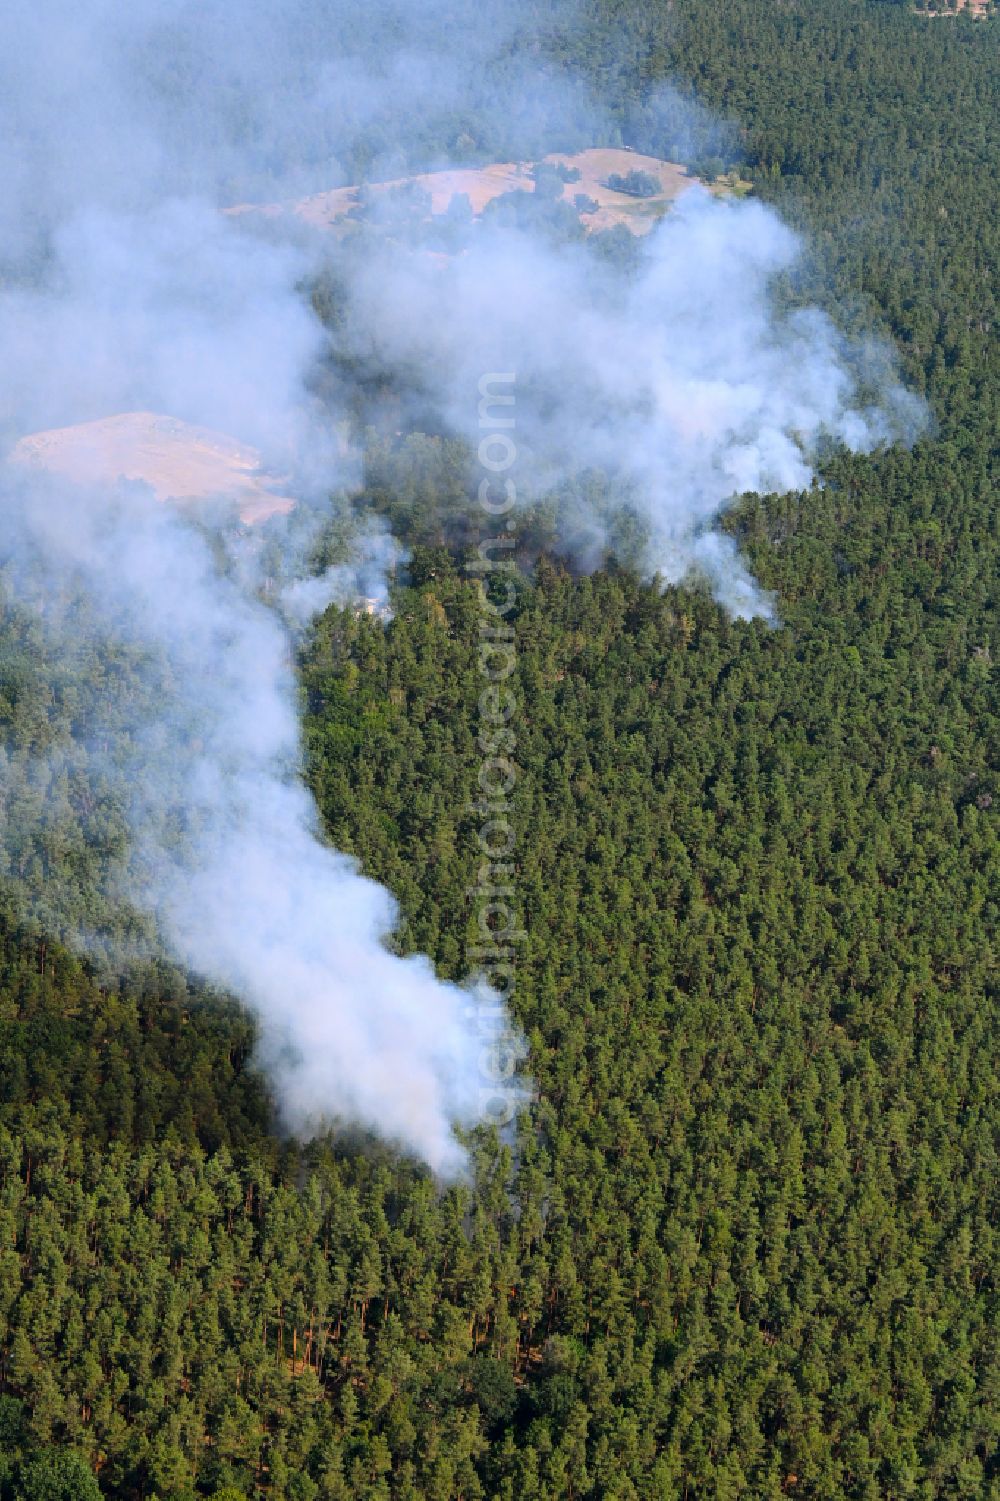 Berlin from above - Puffs of smoke and spread of fire from a forest fire as a result of an explosion at a blast site in the trees of a forest area and forest area on the road Huettenweg - AVUS A100 in the Grunewald district in Berlin, Germany